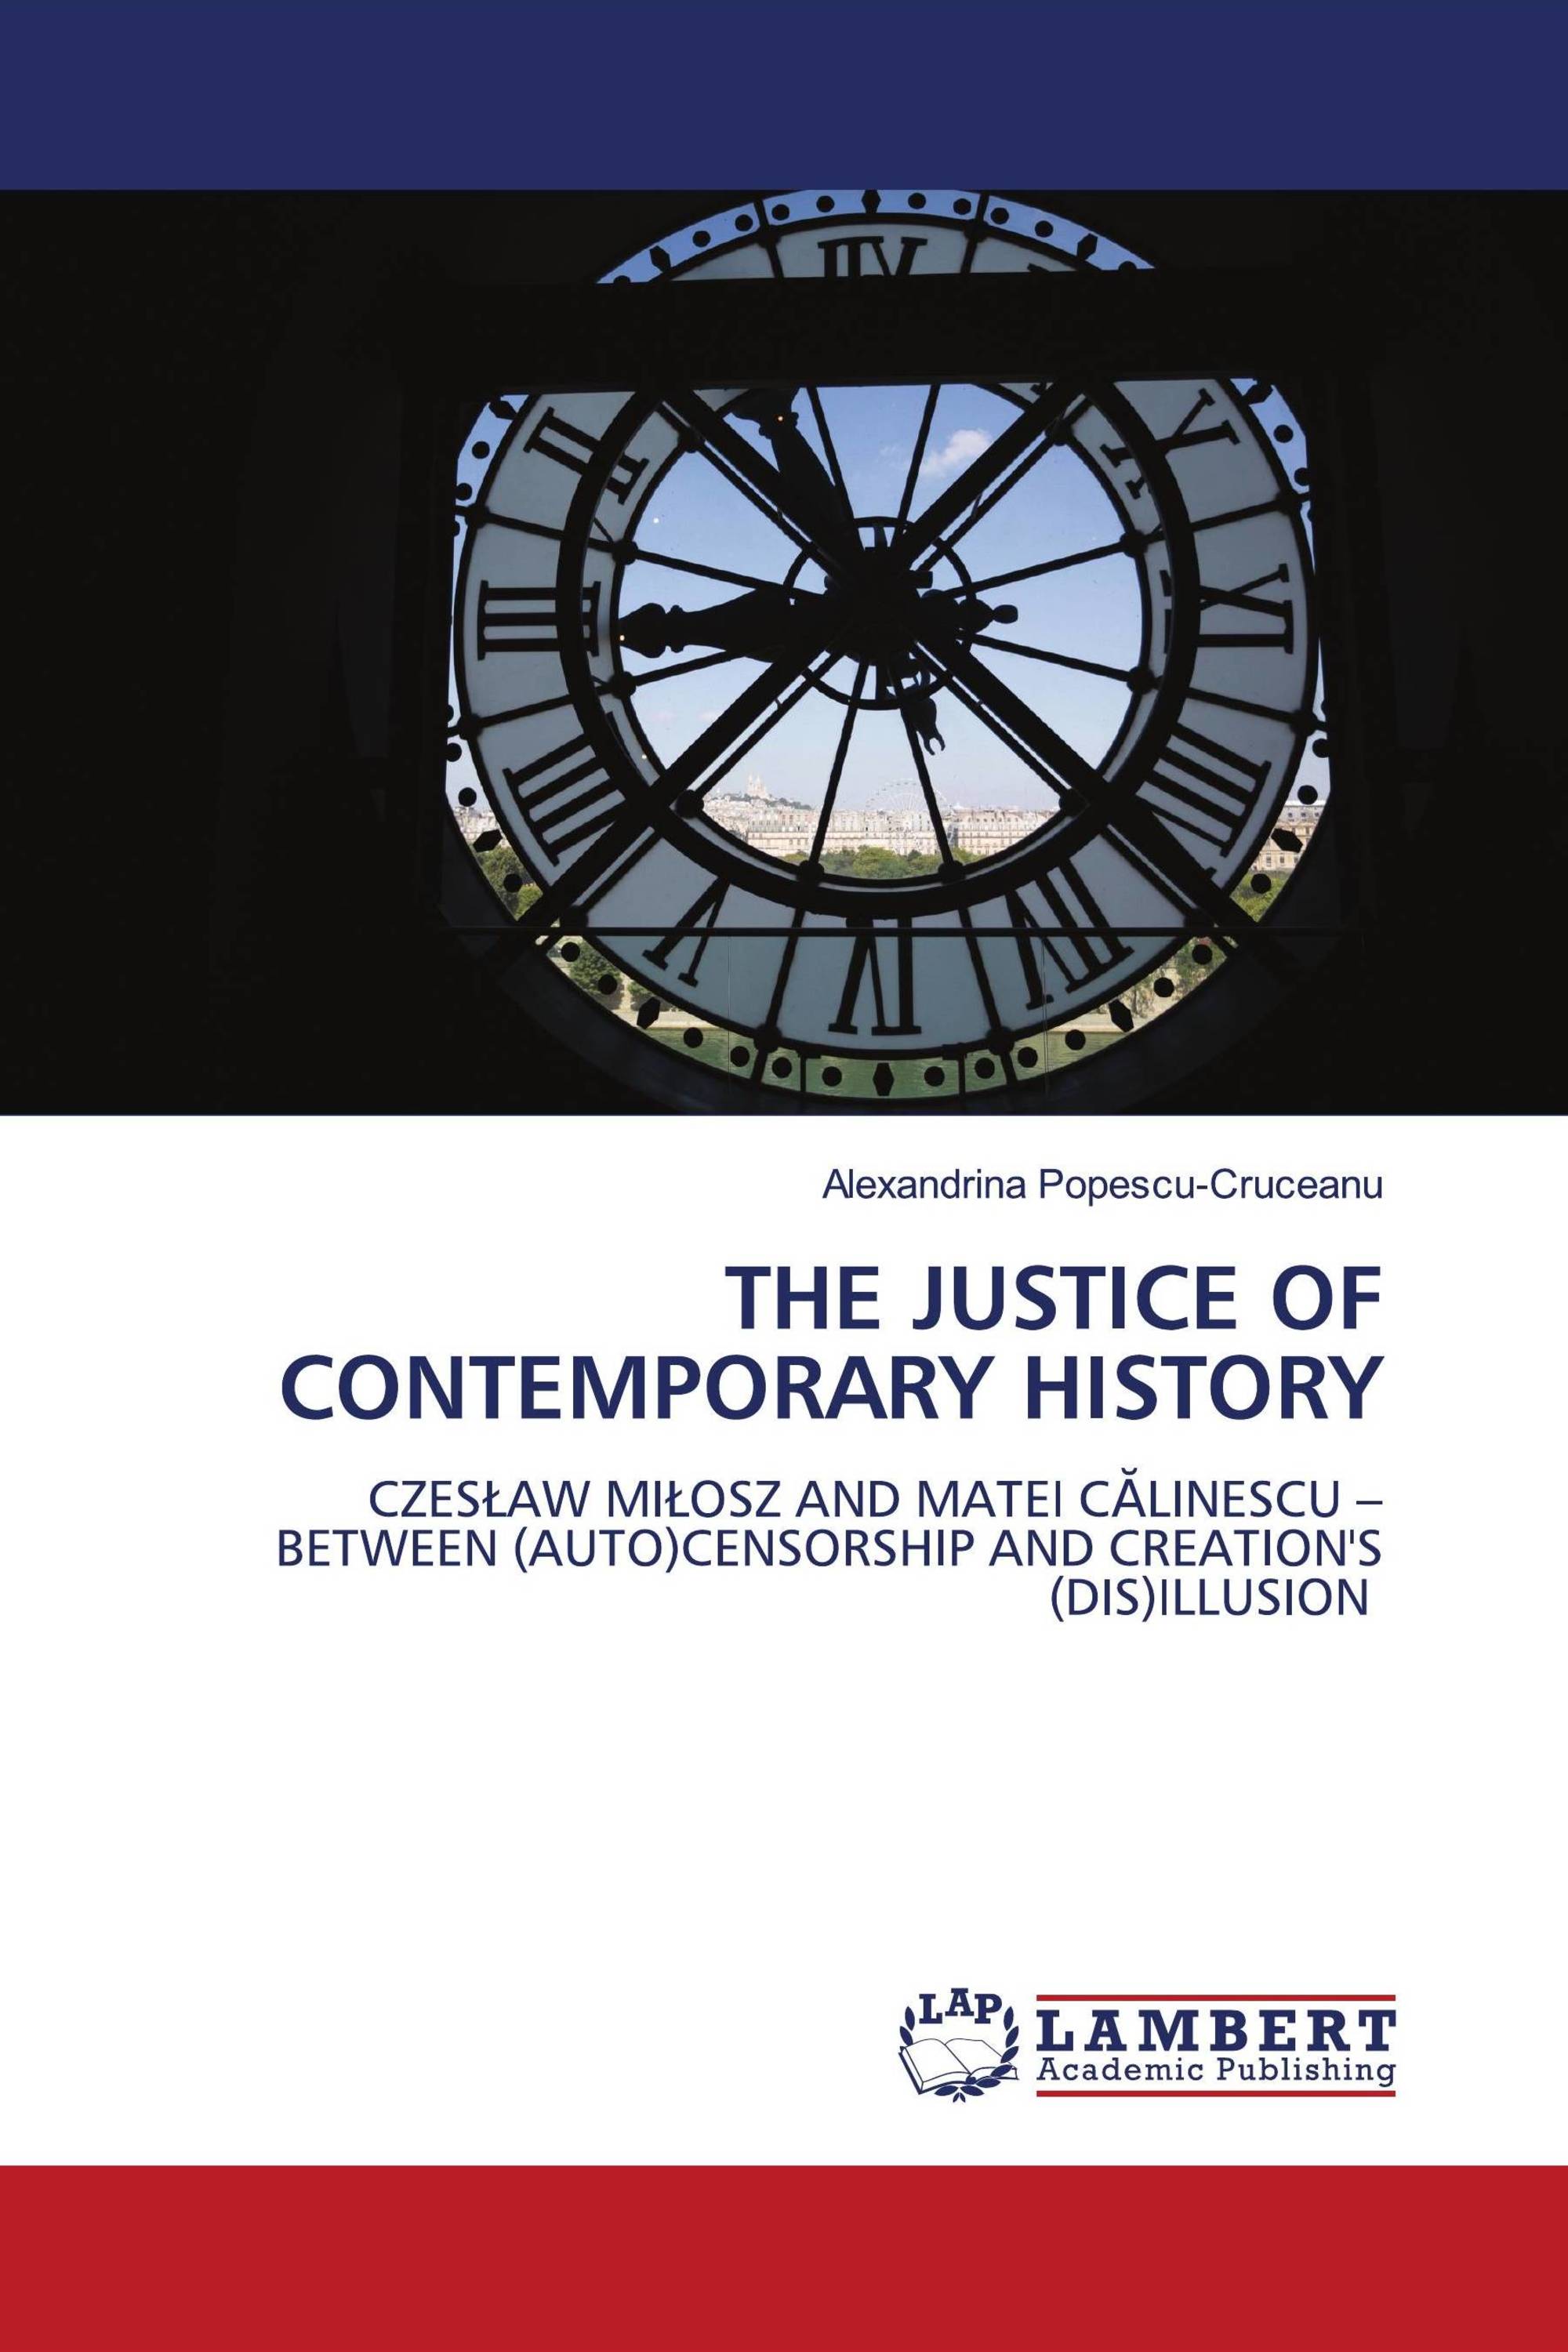 THE JUSTICE OF CONTEMPORARY HISTORY